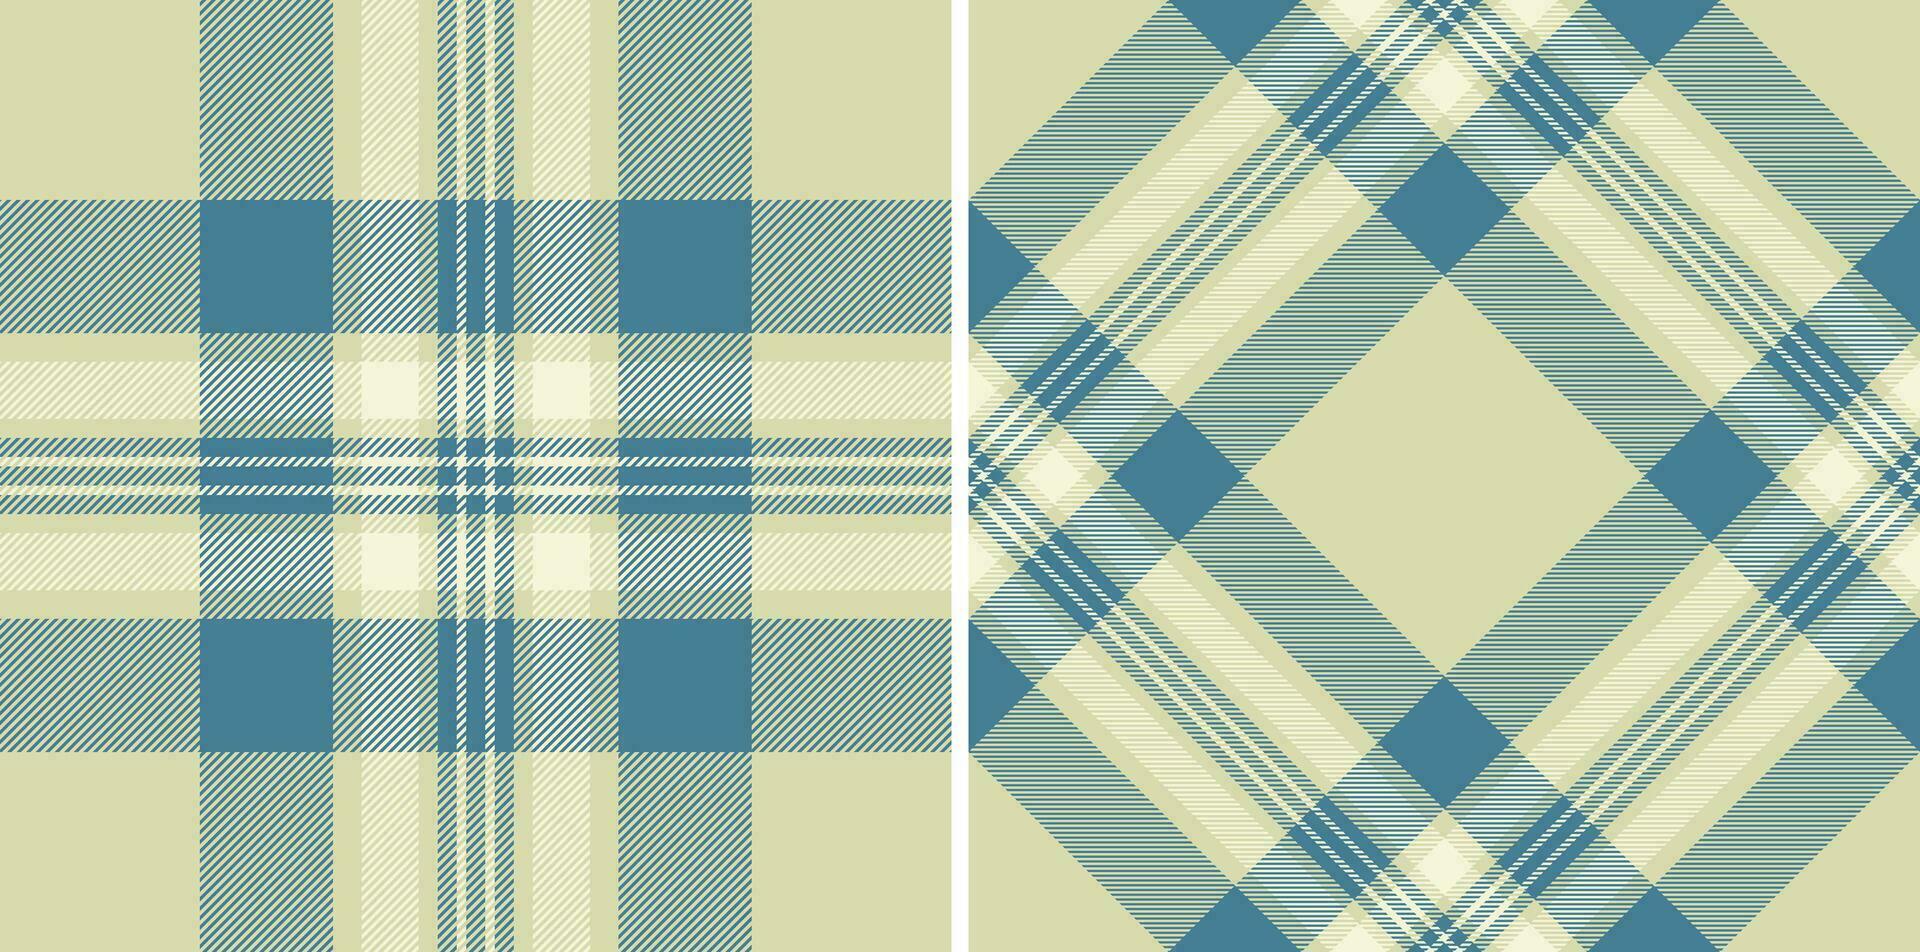 Tartan texture vector of check fabric pattern with a textile plaid background seamless.